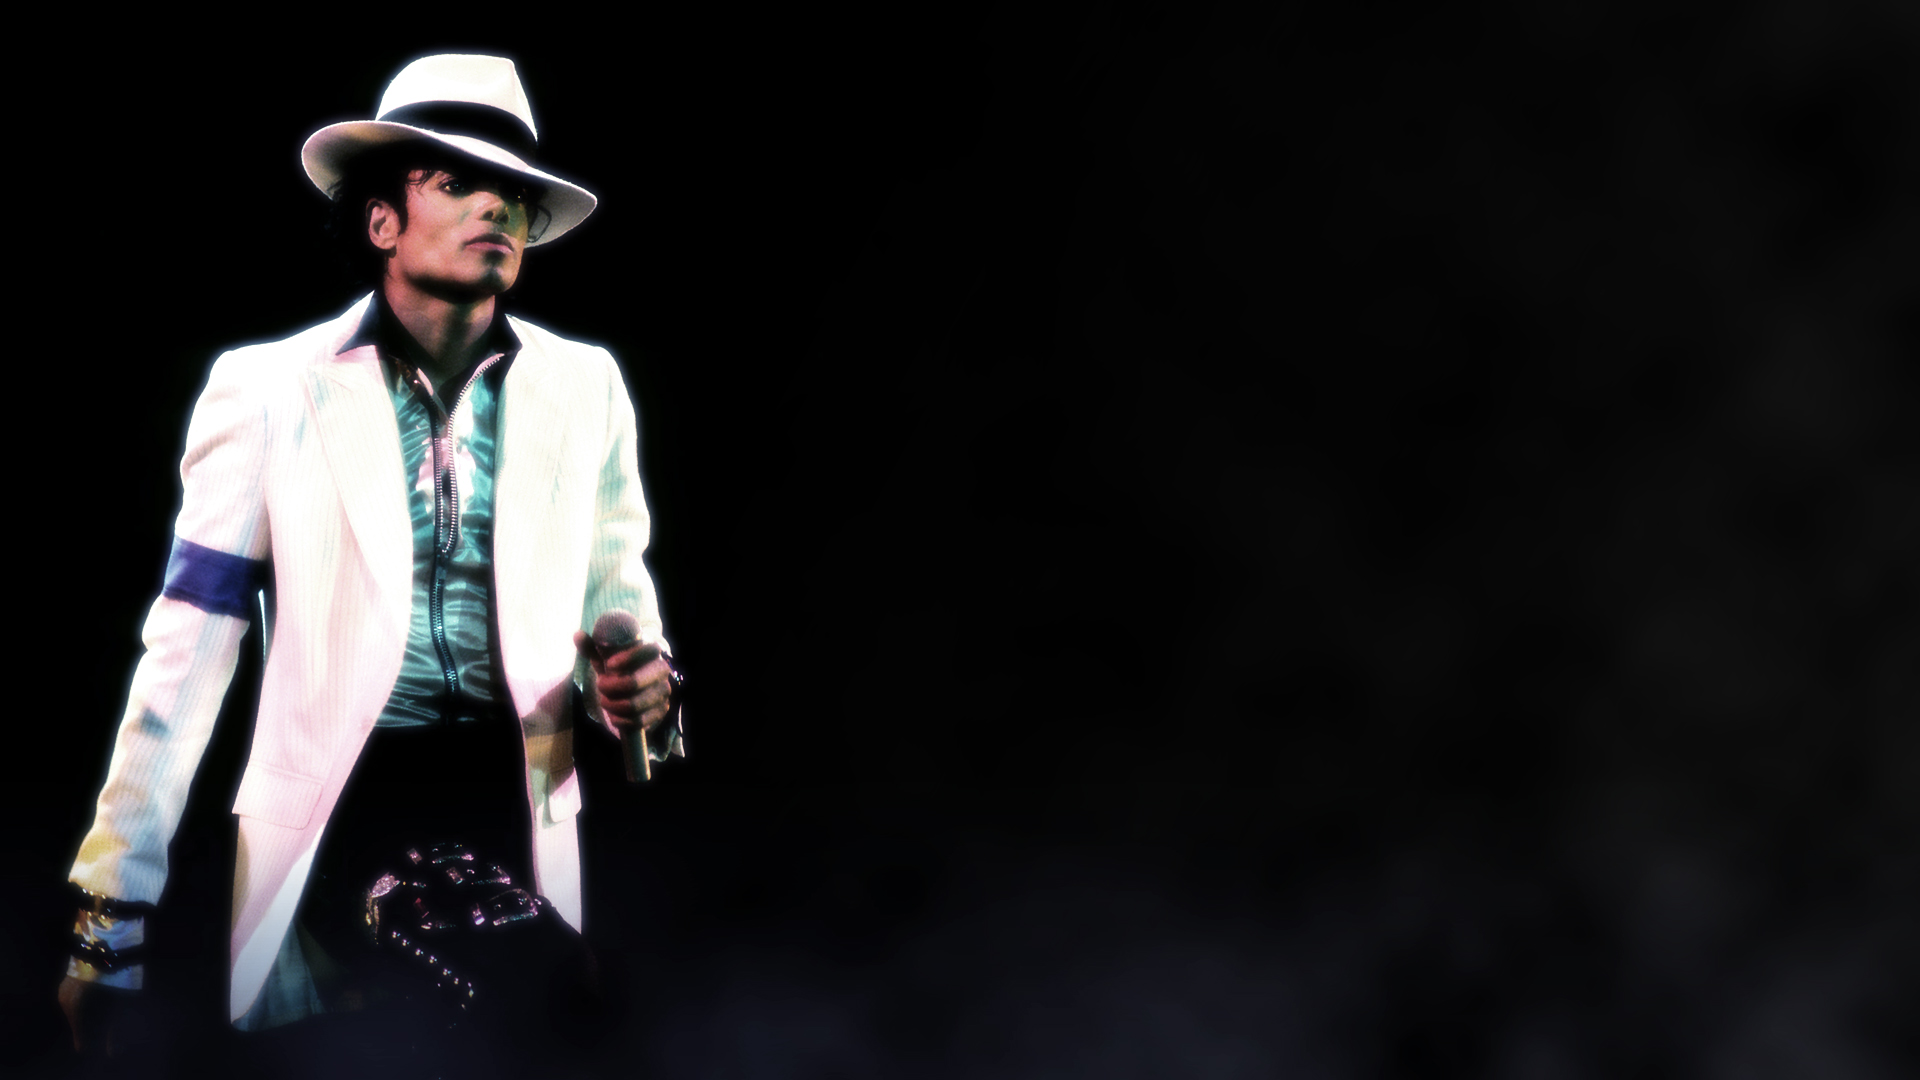 michael jackson images wallpapers #14